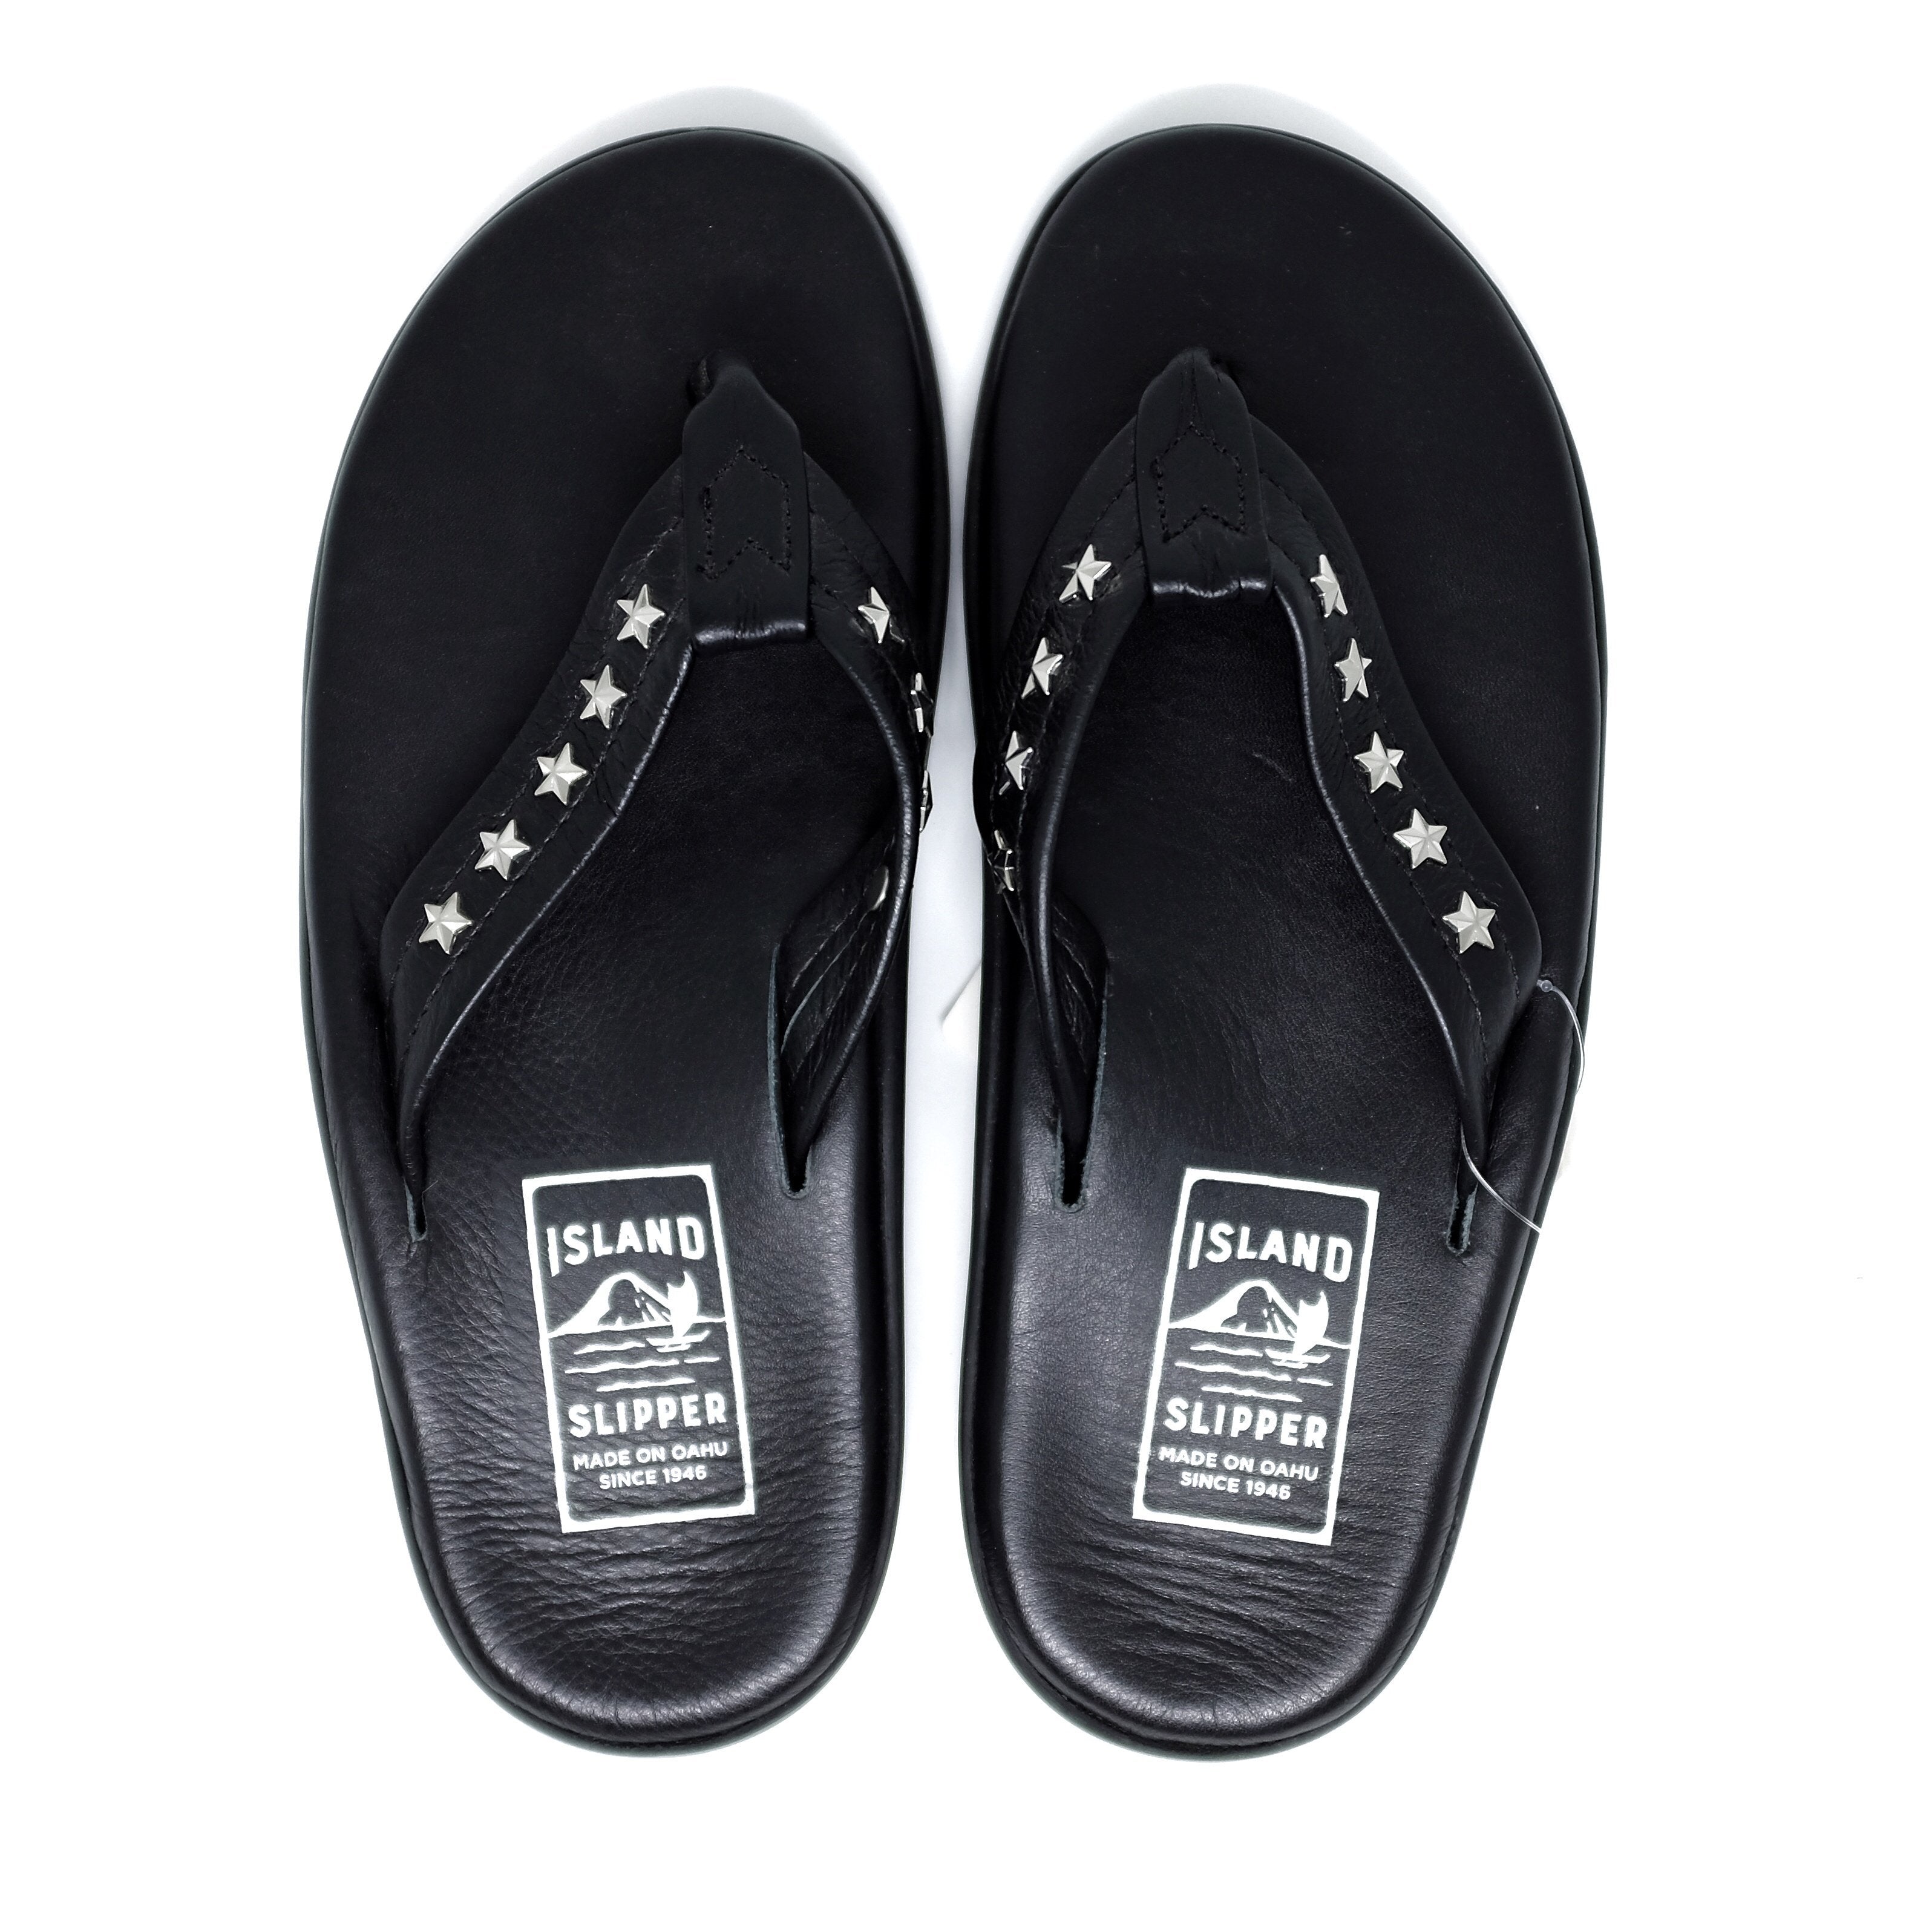 ISLAND SLIPPER / BLACK LEATHER THONG SANDALS WITH STAR STUDS